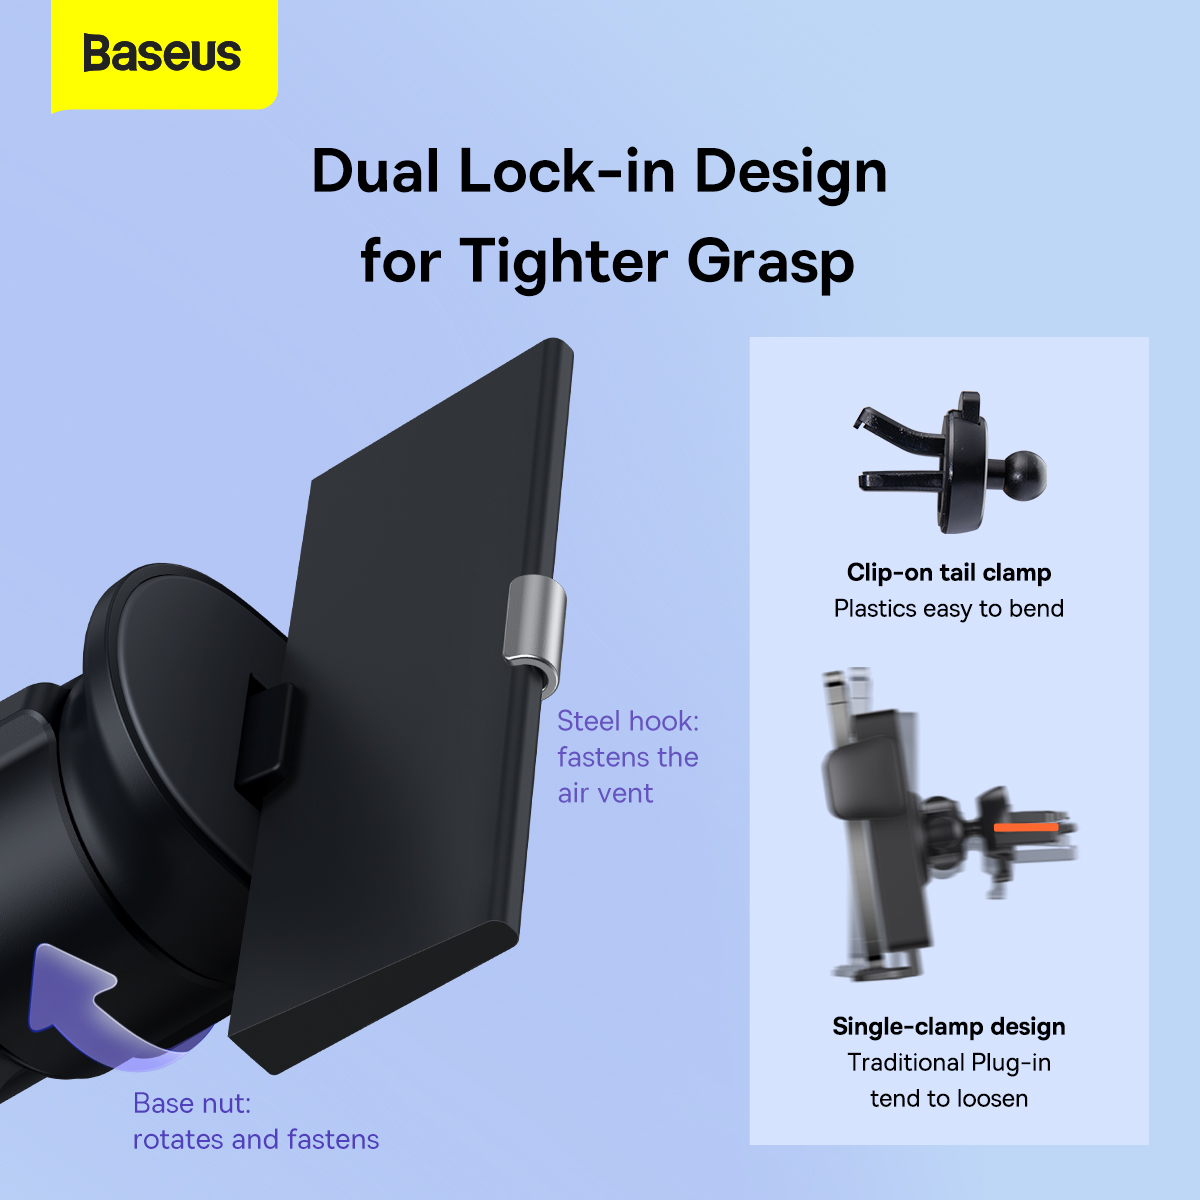 Baseus-Metal-Age-II-New-Gravity-Car-Mount-Phone-Holder-Shockproof-Air-Outlet-Stand-for-47-67-inch-Ph-1932910-4